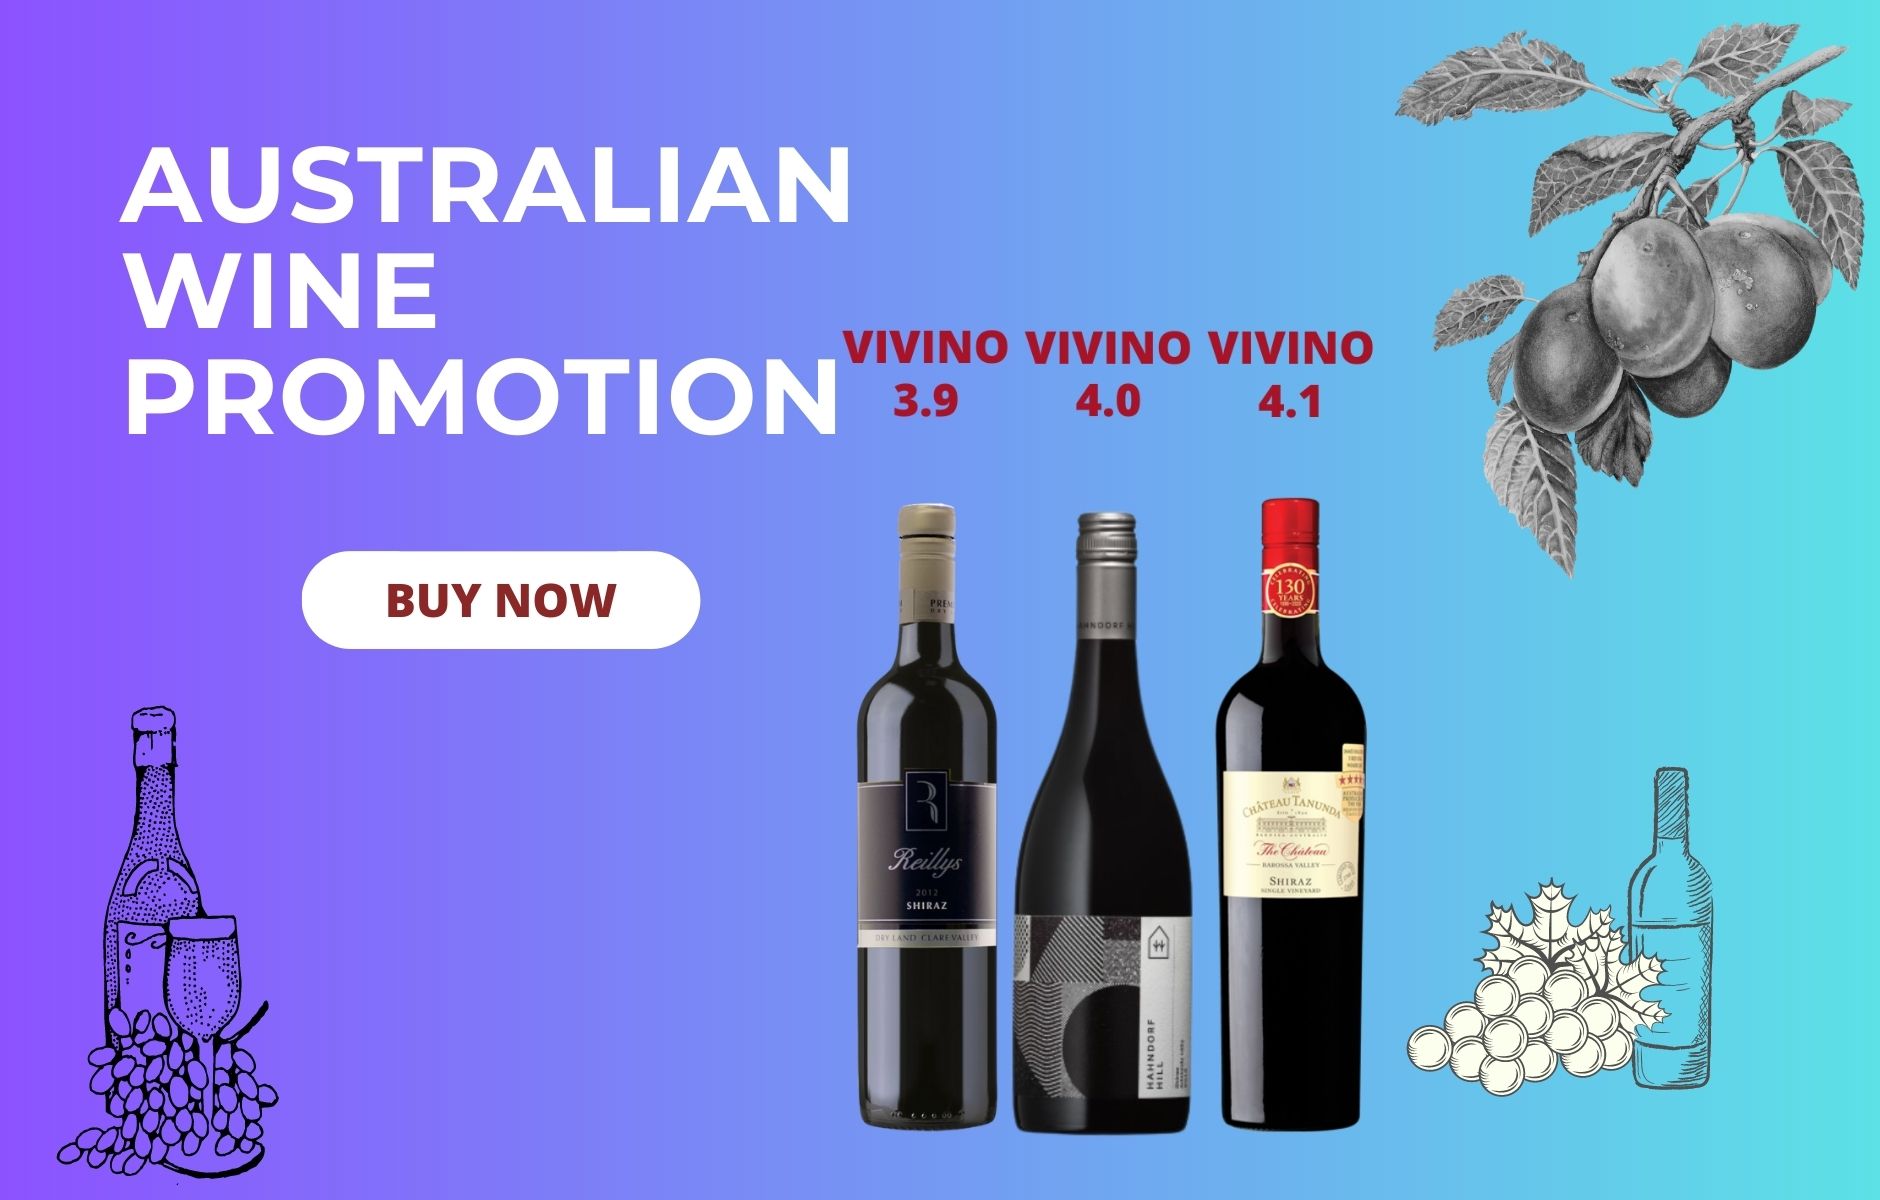 Australian Wine - Value, Discovery And Indulgence Collection Promotion